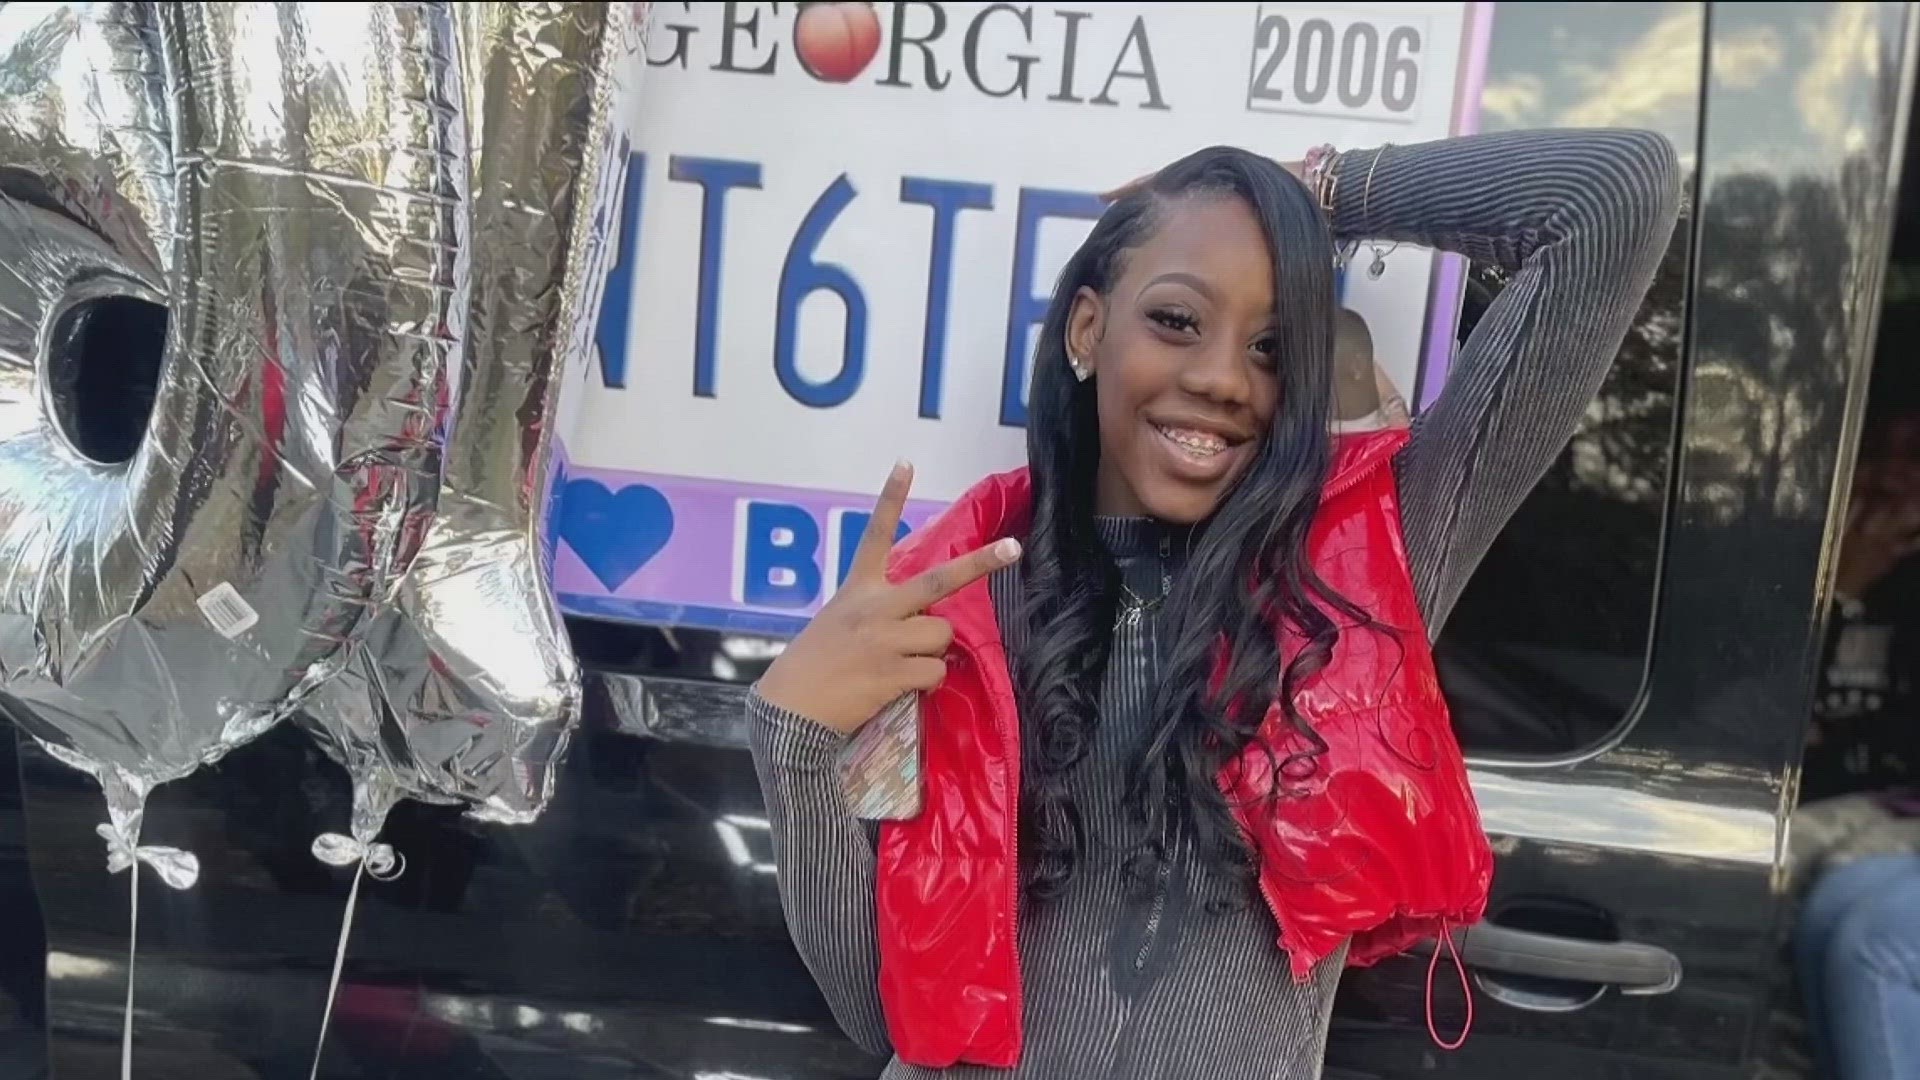 Bre'Asia Powell was shot and killed while attending a gathering on school property.